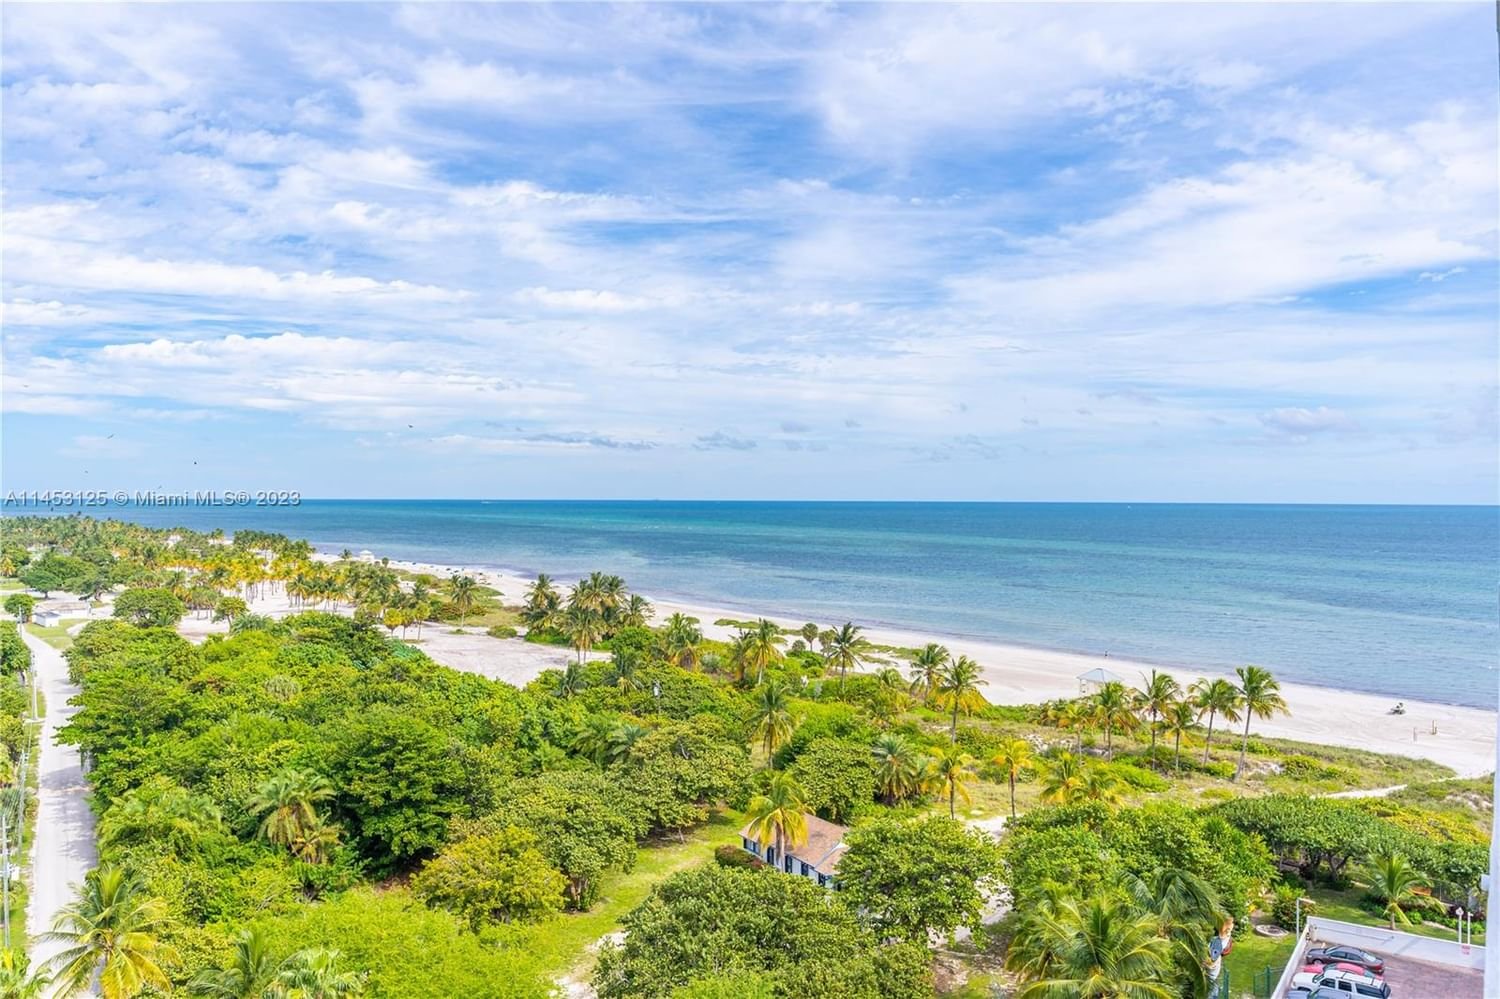 Real estate property located at 177 Ocean Lane Dr #1212, Miami-Dade County, Key Biscayne, FL